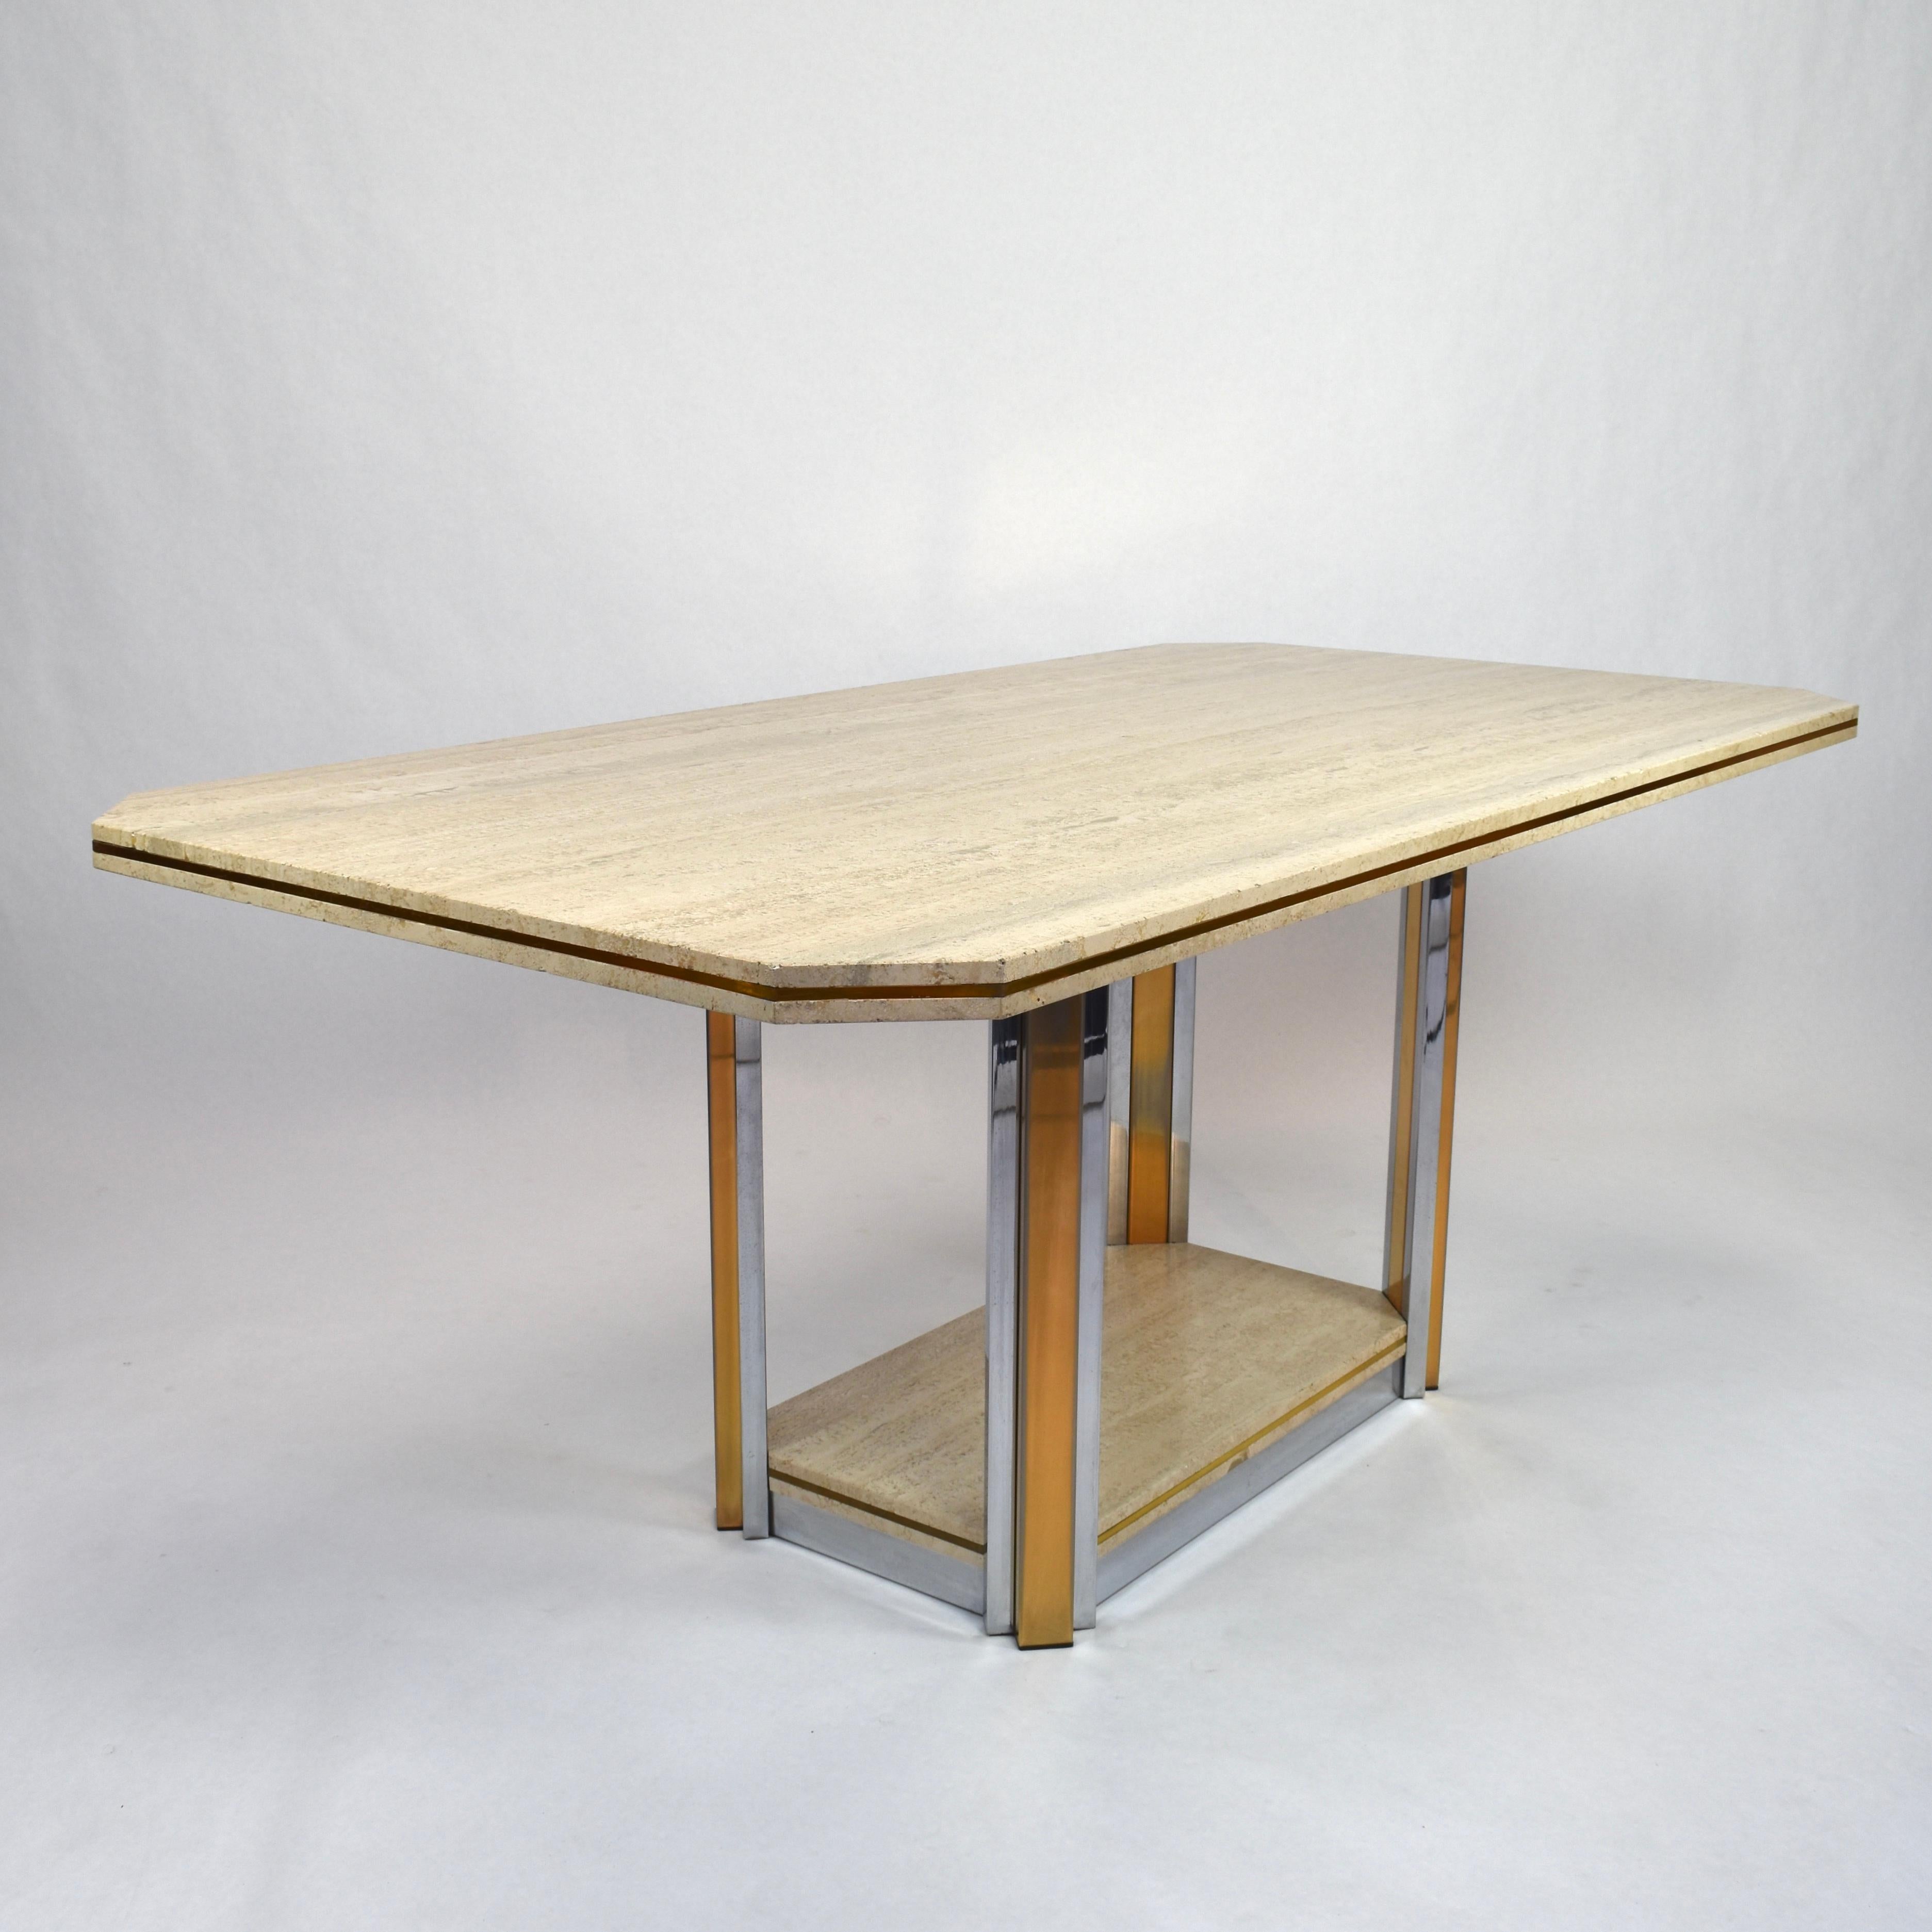 Willy Rizzo style dining table in travertine and brass and chrome details.

Designer: Willy Rizzo style 

Manufacturer: Unknown

Country: Italy or Belgium

Model: Dining table

Material: Travertine/ brass/ chrome

Design period: